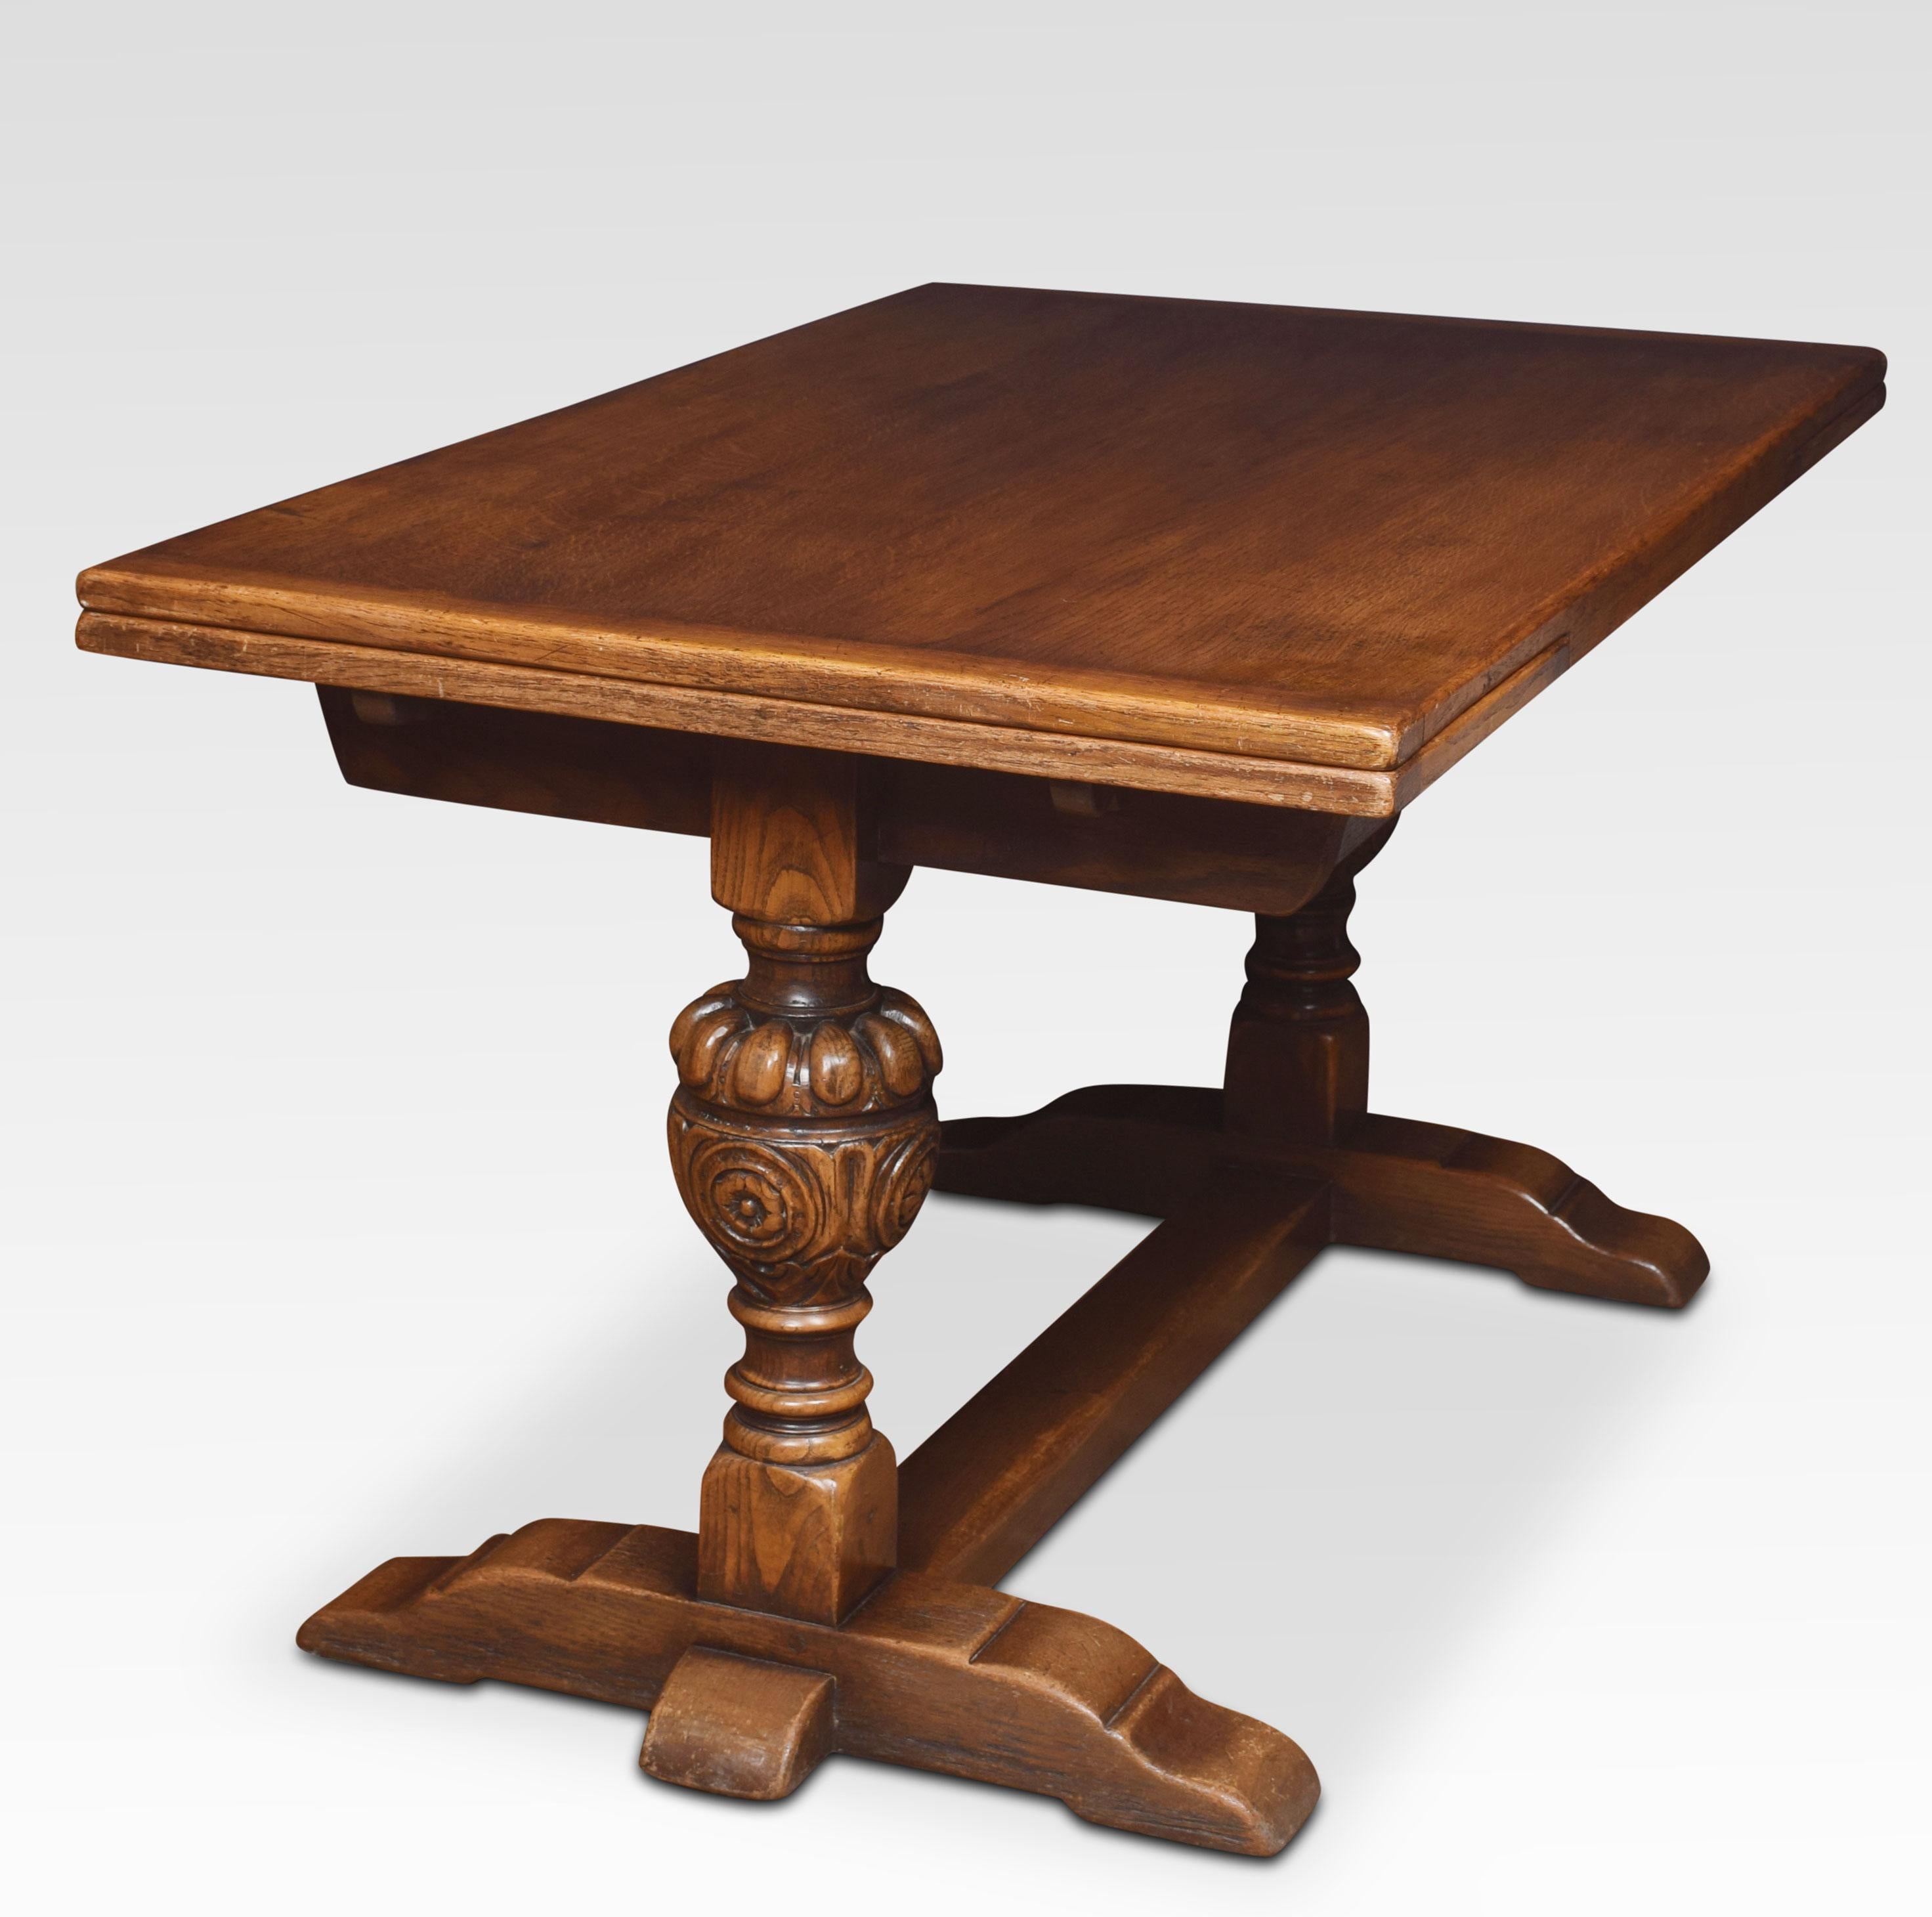 Oak draw leaf refectory table, the rectangular solid oak top having pullout / pull-out ends. Above carved bulbous cup and cover supports united by a stretcher.
Dimensions:
Height 29.5 inches
Width 53 inches when open 82 inches
Depth 33 inches.